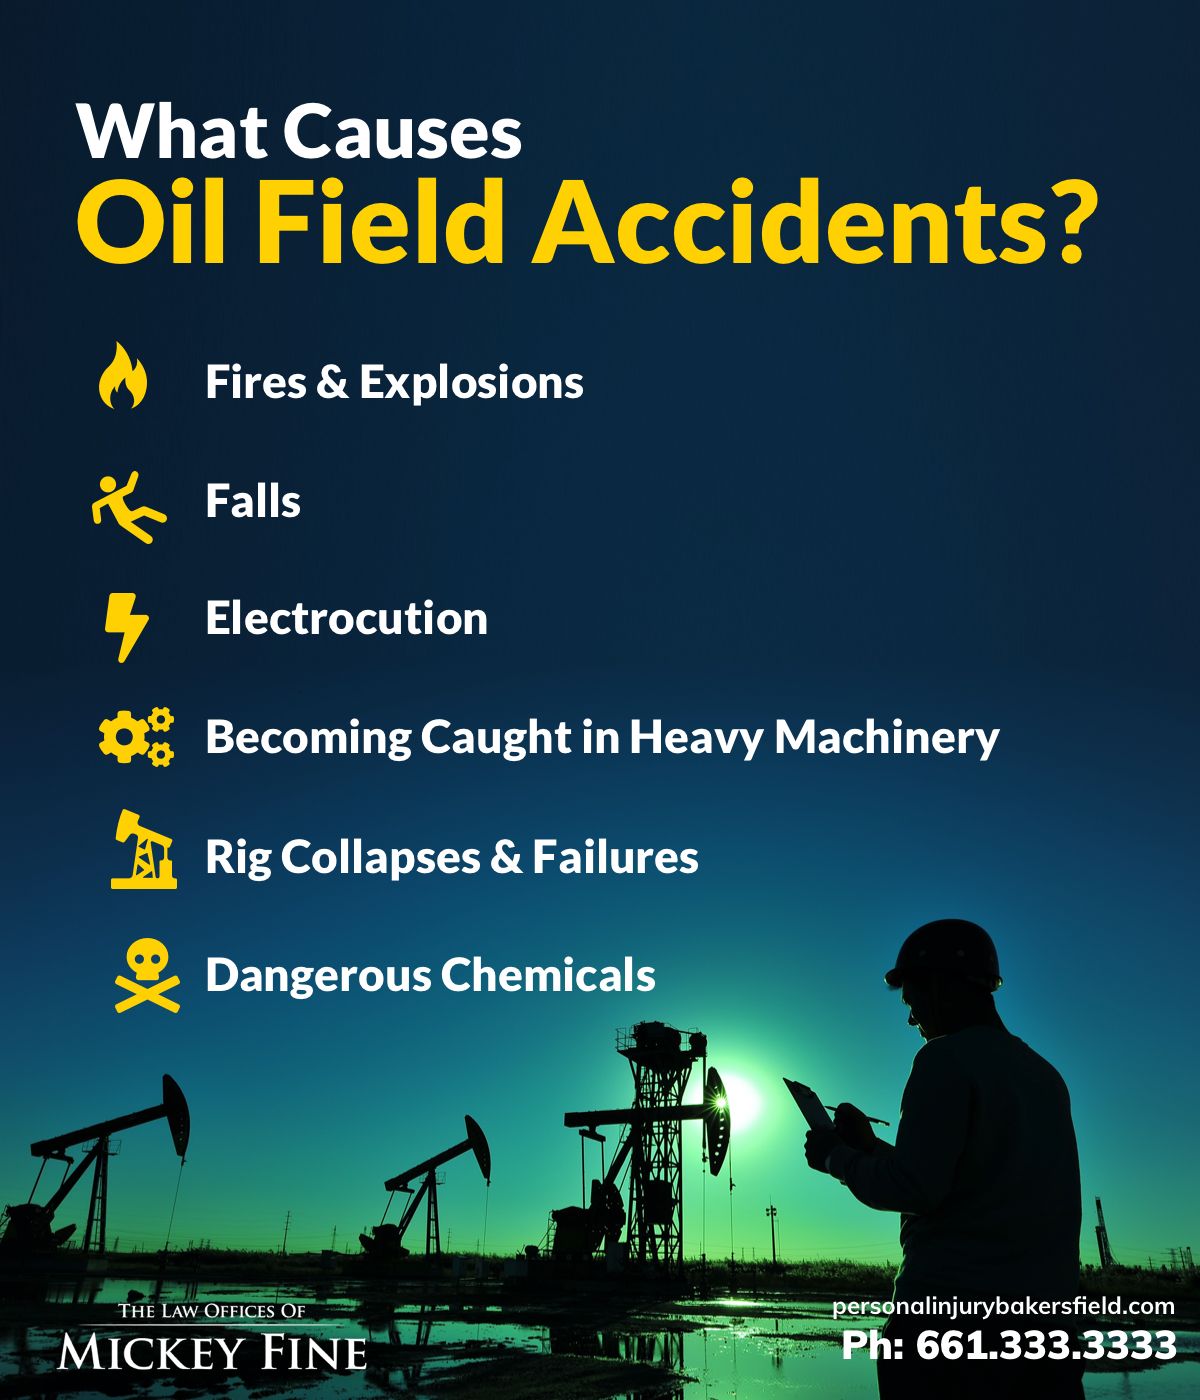 What Causes Oil Field Accidents?